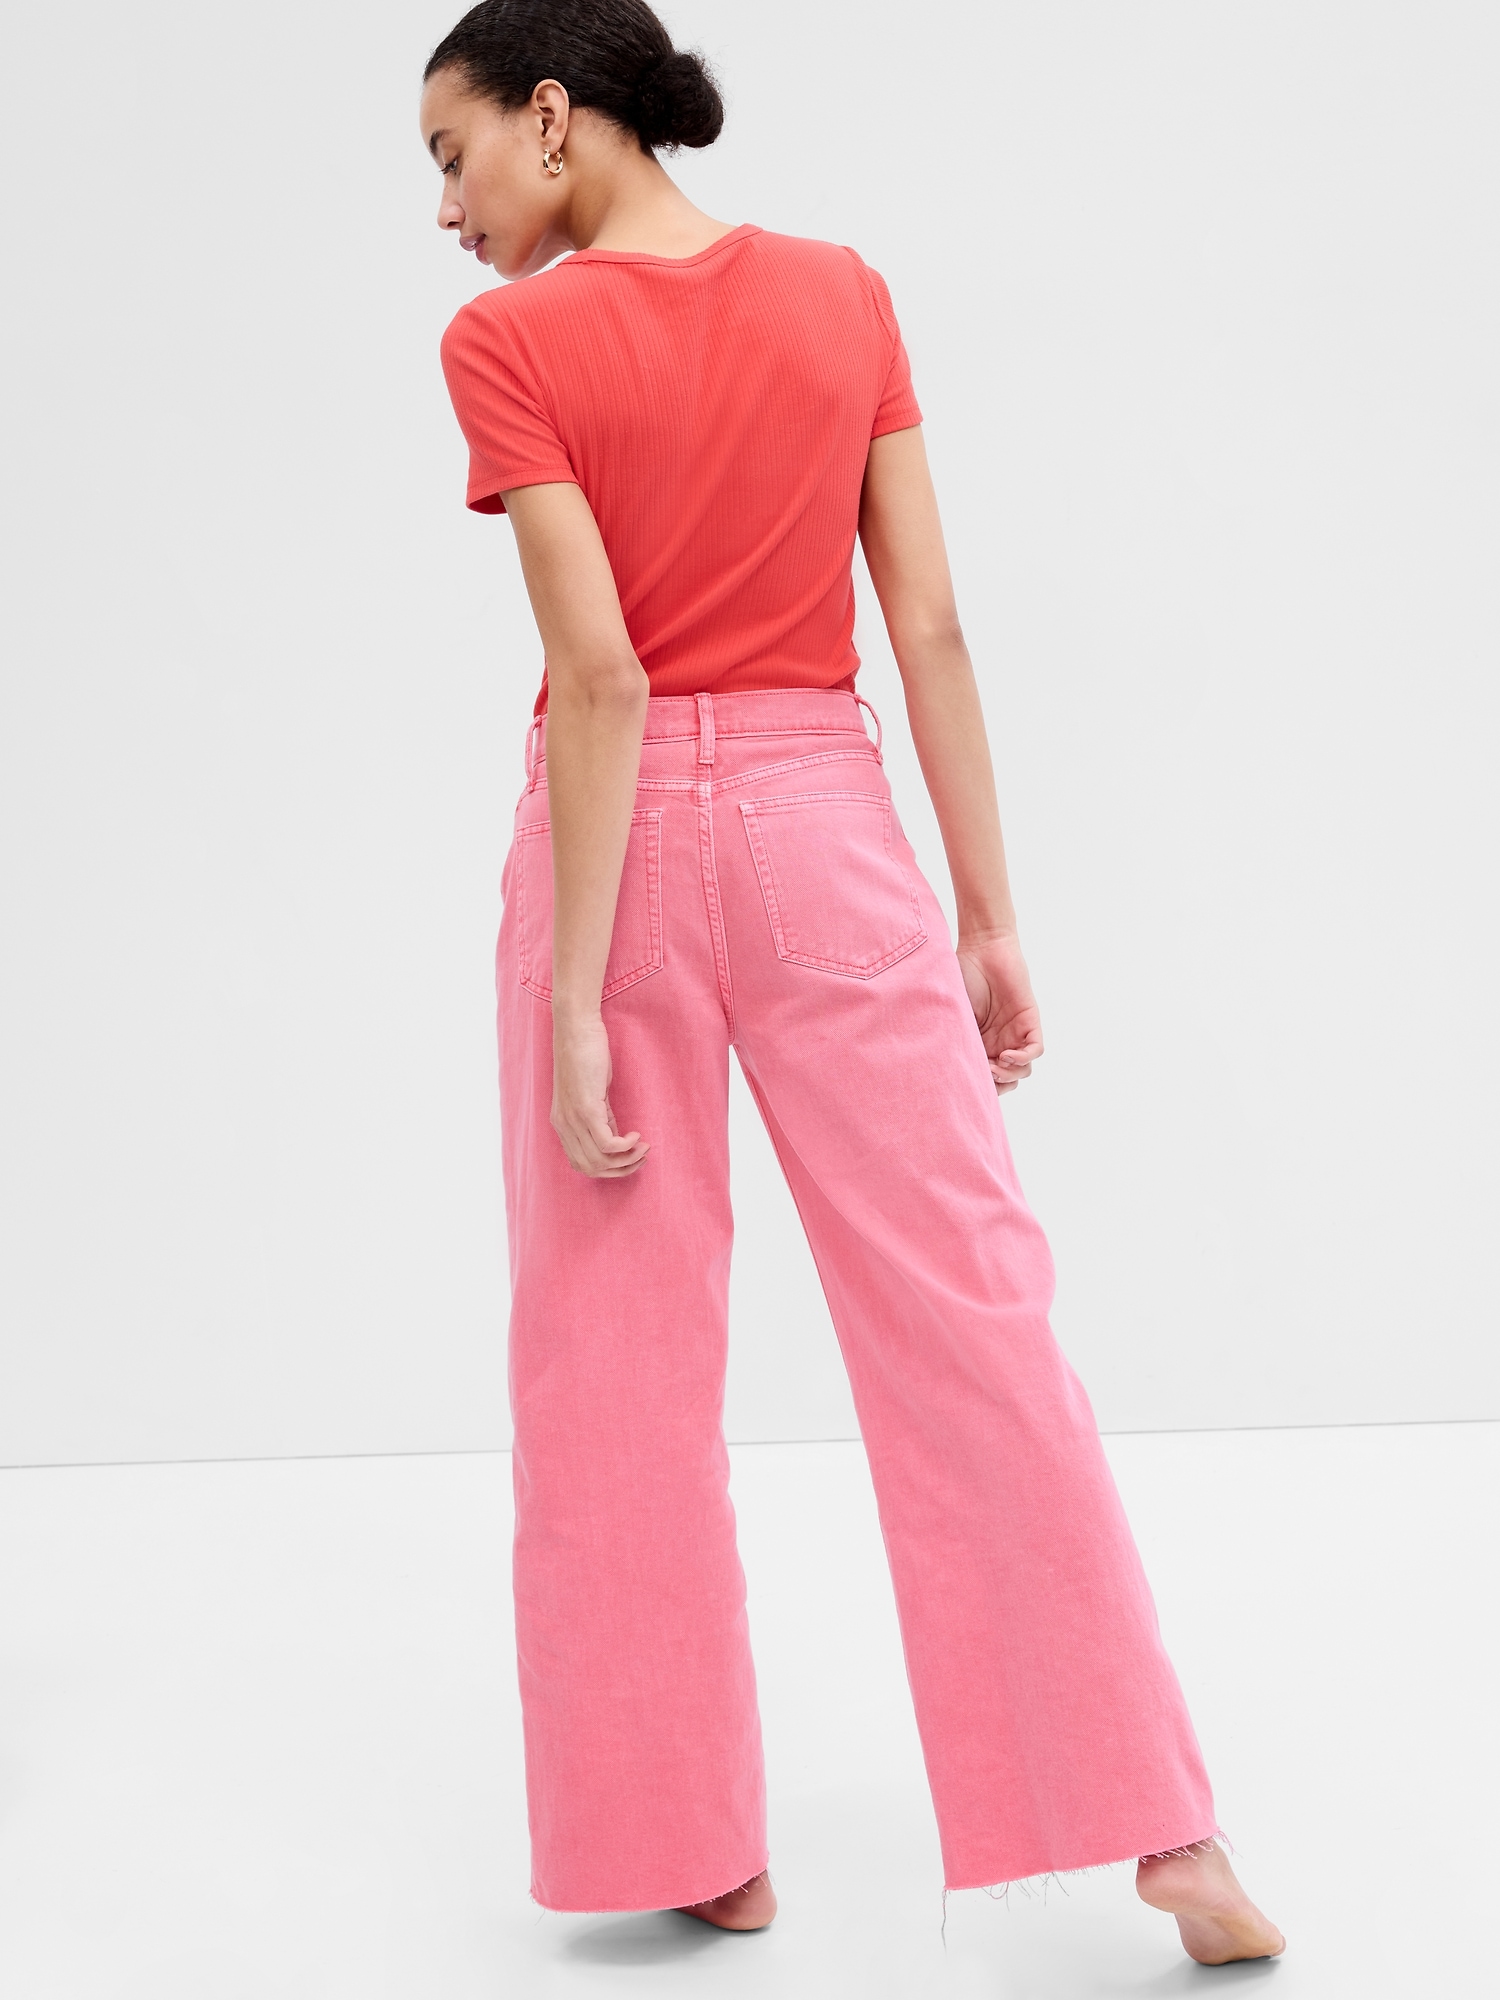 High Rise Wide-Leg Jeans with Washwell | Gap Factory